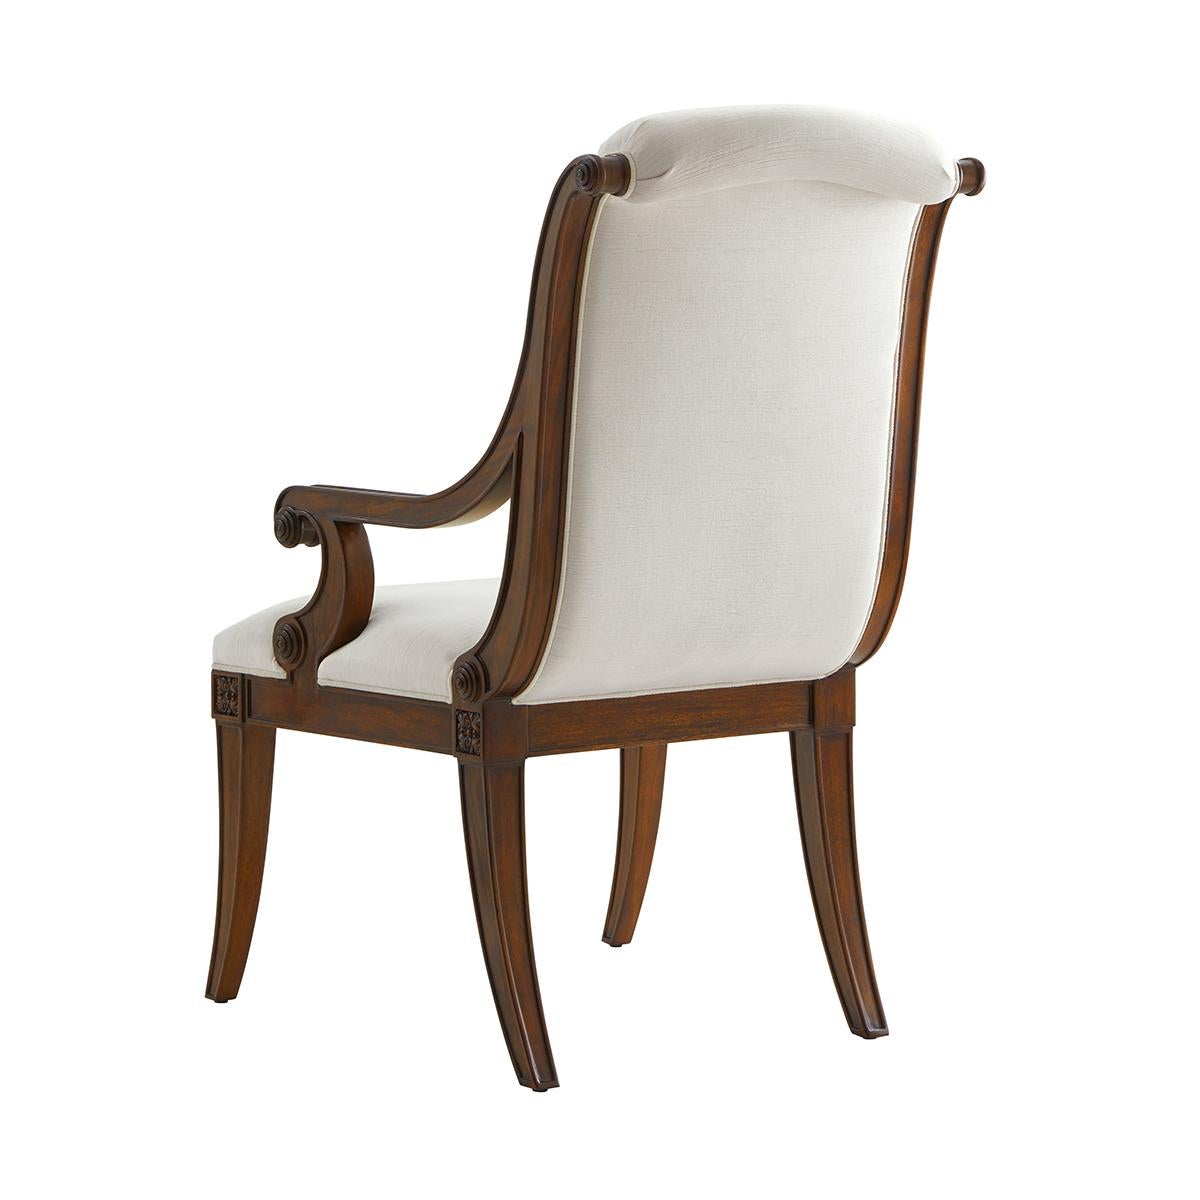 Two mahogany armchairs, with an over scroll padded back and seat between open scroll arms and above floral capital carved and paneled sabre legs. Inspired by a 19th-century French original.

Dimensions: 25.25